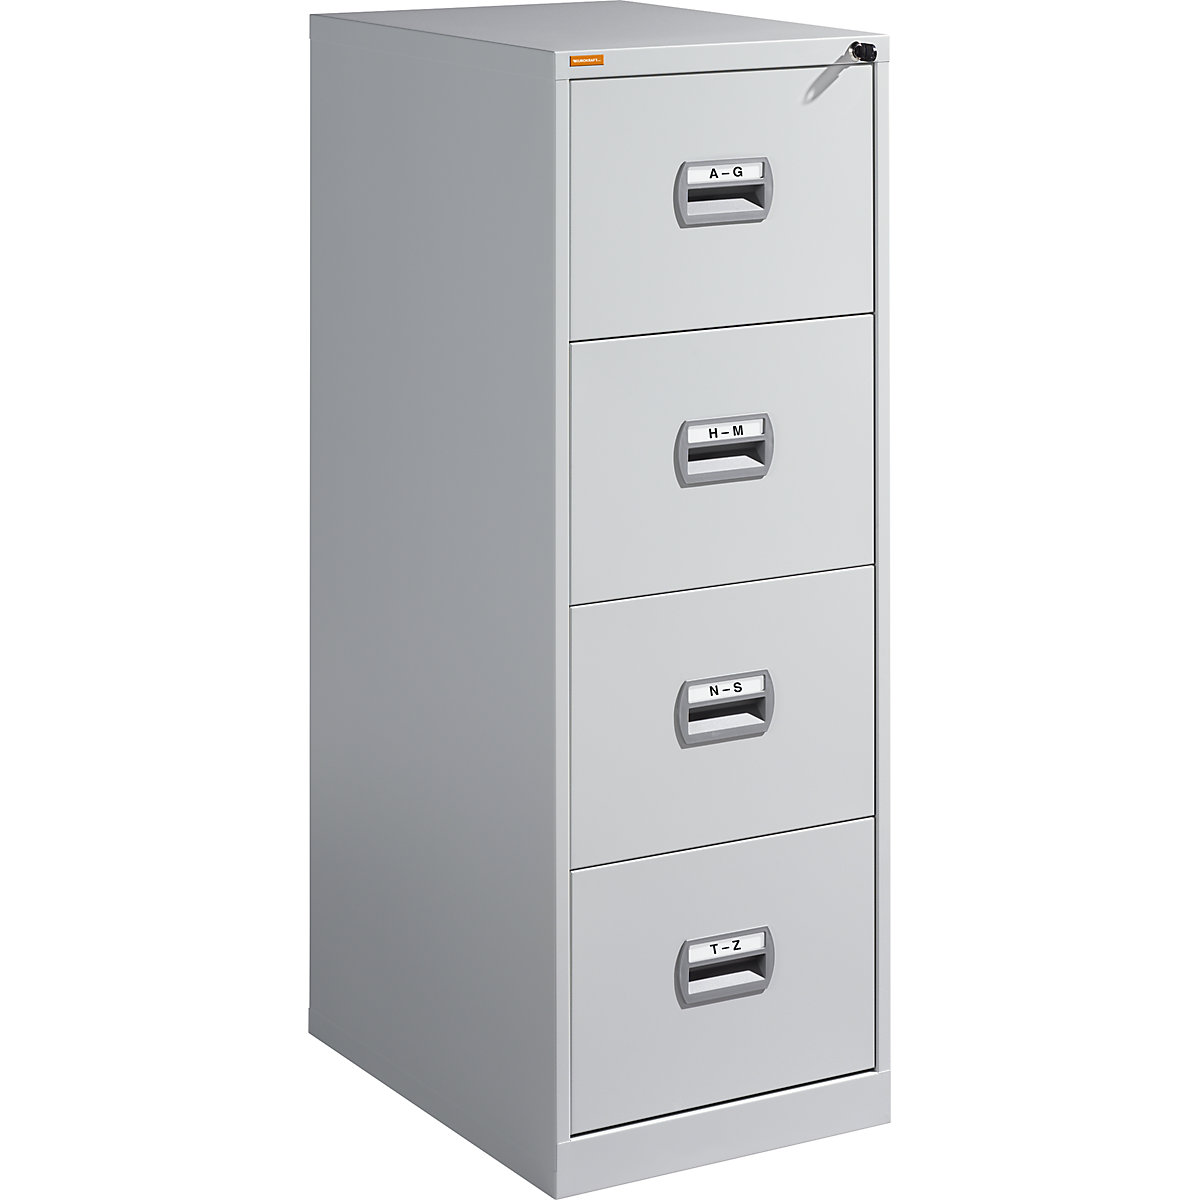 File Cabinets File Cabinets Lockable Data Office Storage Drawer Confidentiality Desktop Organizer Anti-Off Buckle Pp Plastic 29.5x39.4x32.5cm File Cabinet Color : B1 